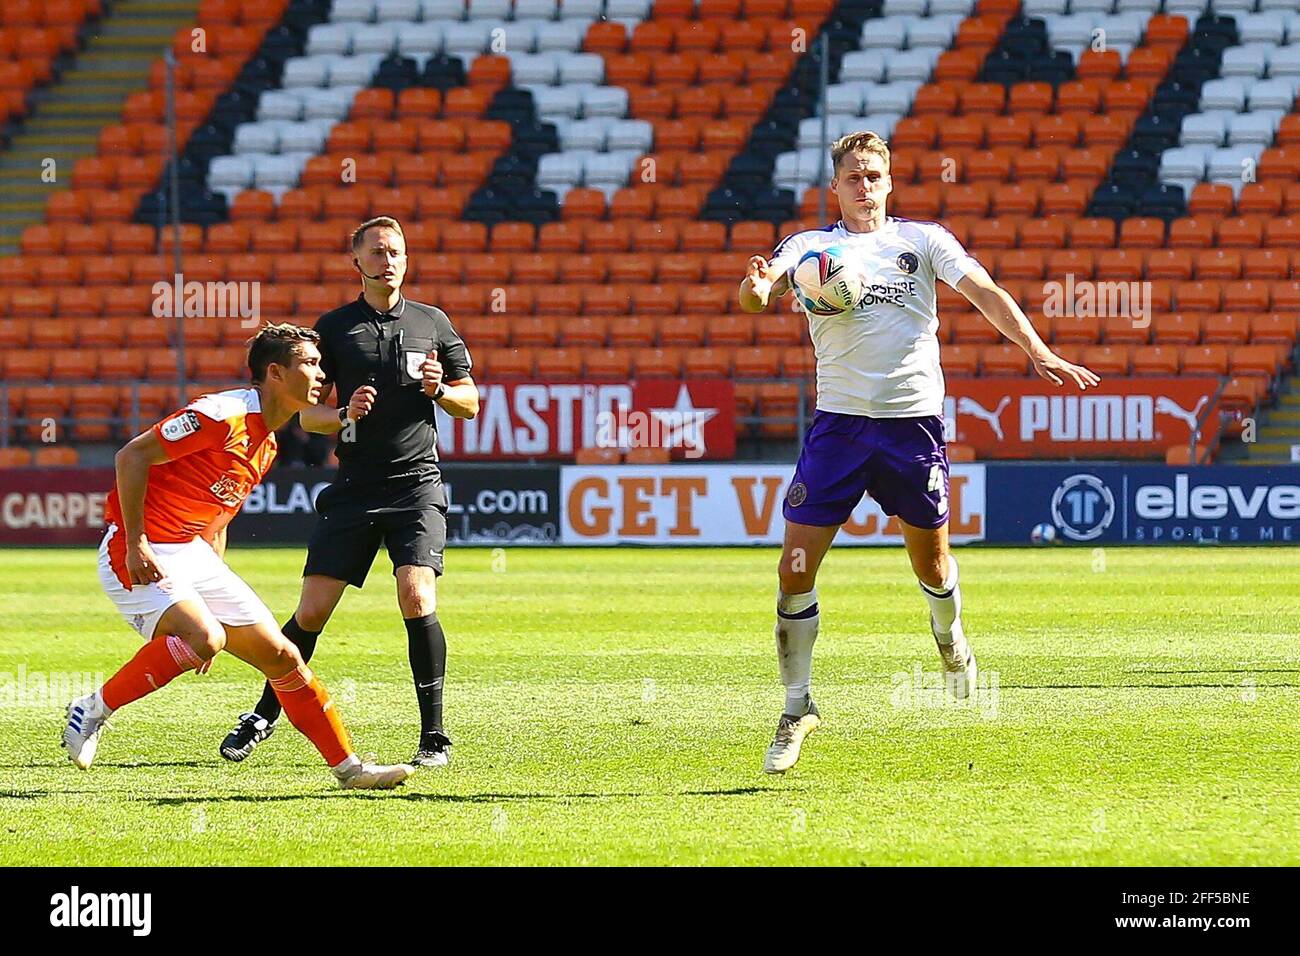 Bloomfield Road, Blackpool, UK. 24th Apr, 2021. David Edwards (4) of Shrewsbury controls the ball during the game Blackpool v Shrewsbury Sky Bet League One 2020/21 Bloomfield Road, Blackpool, England - 24th April 2021 Credit: Arthur Haigh/Alamy Live News Stock Photo